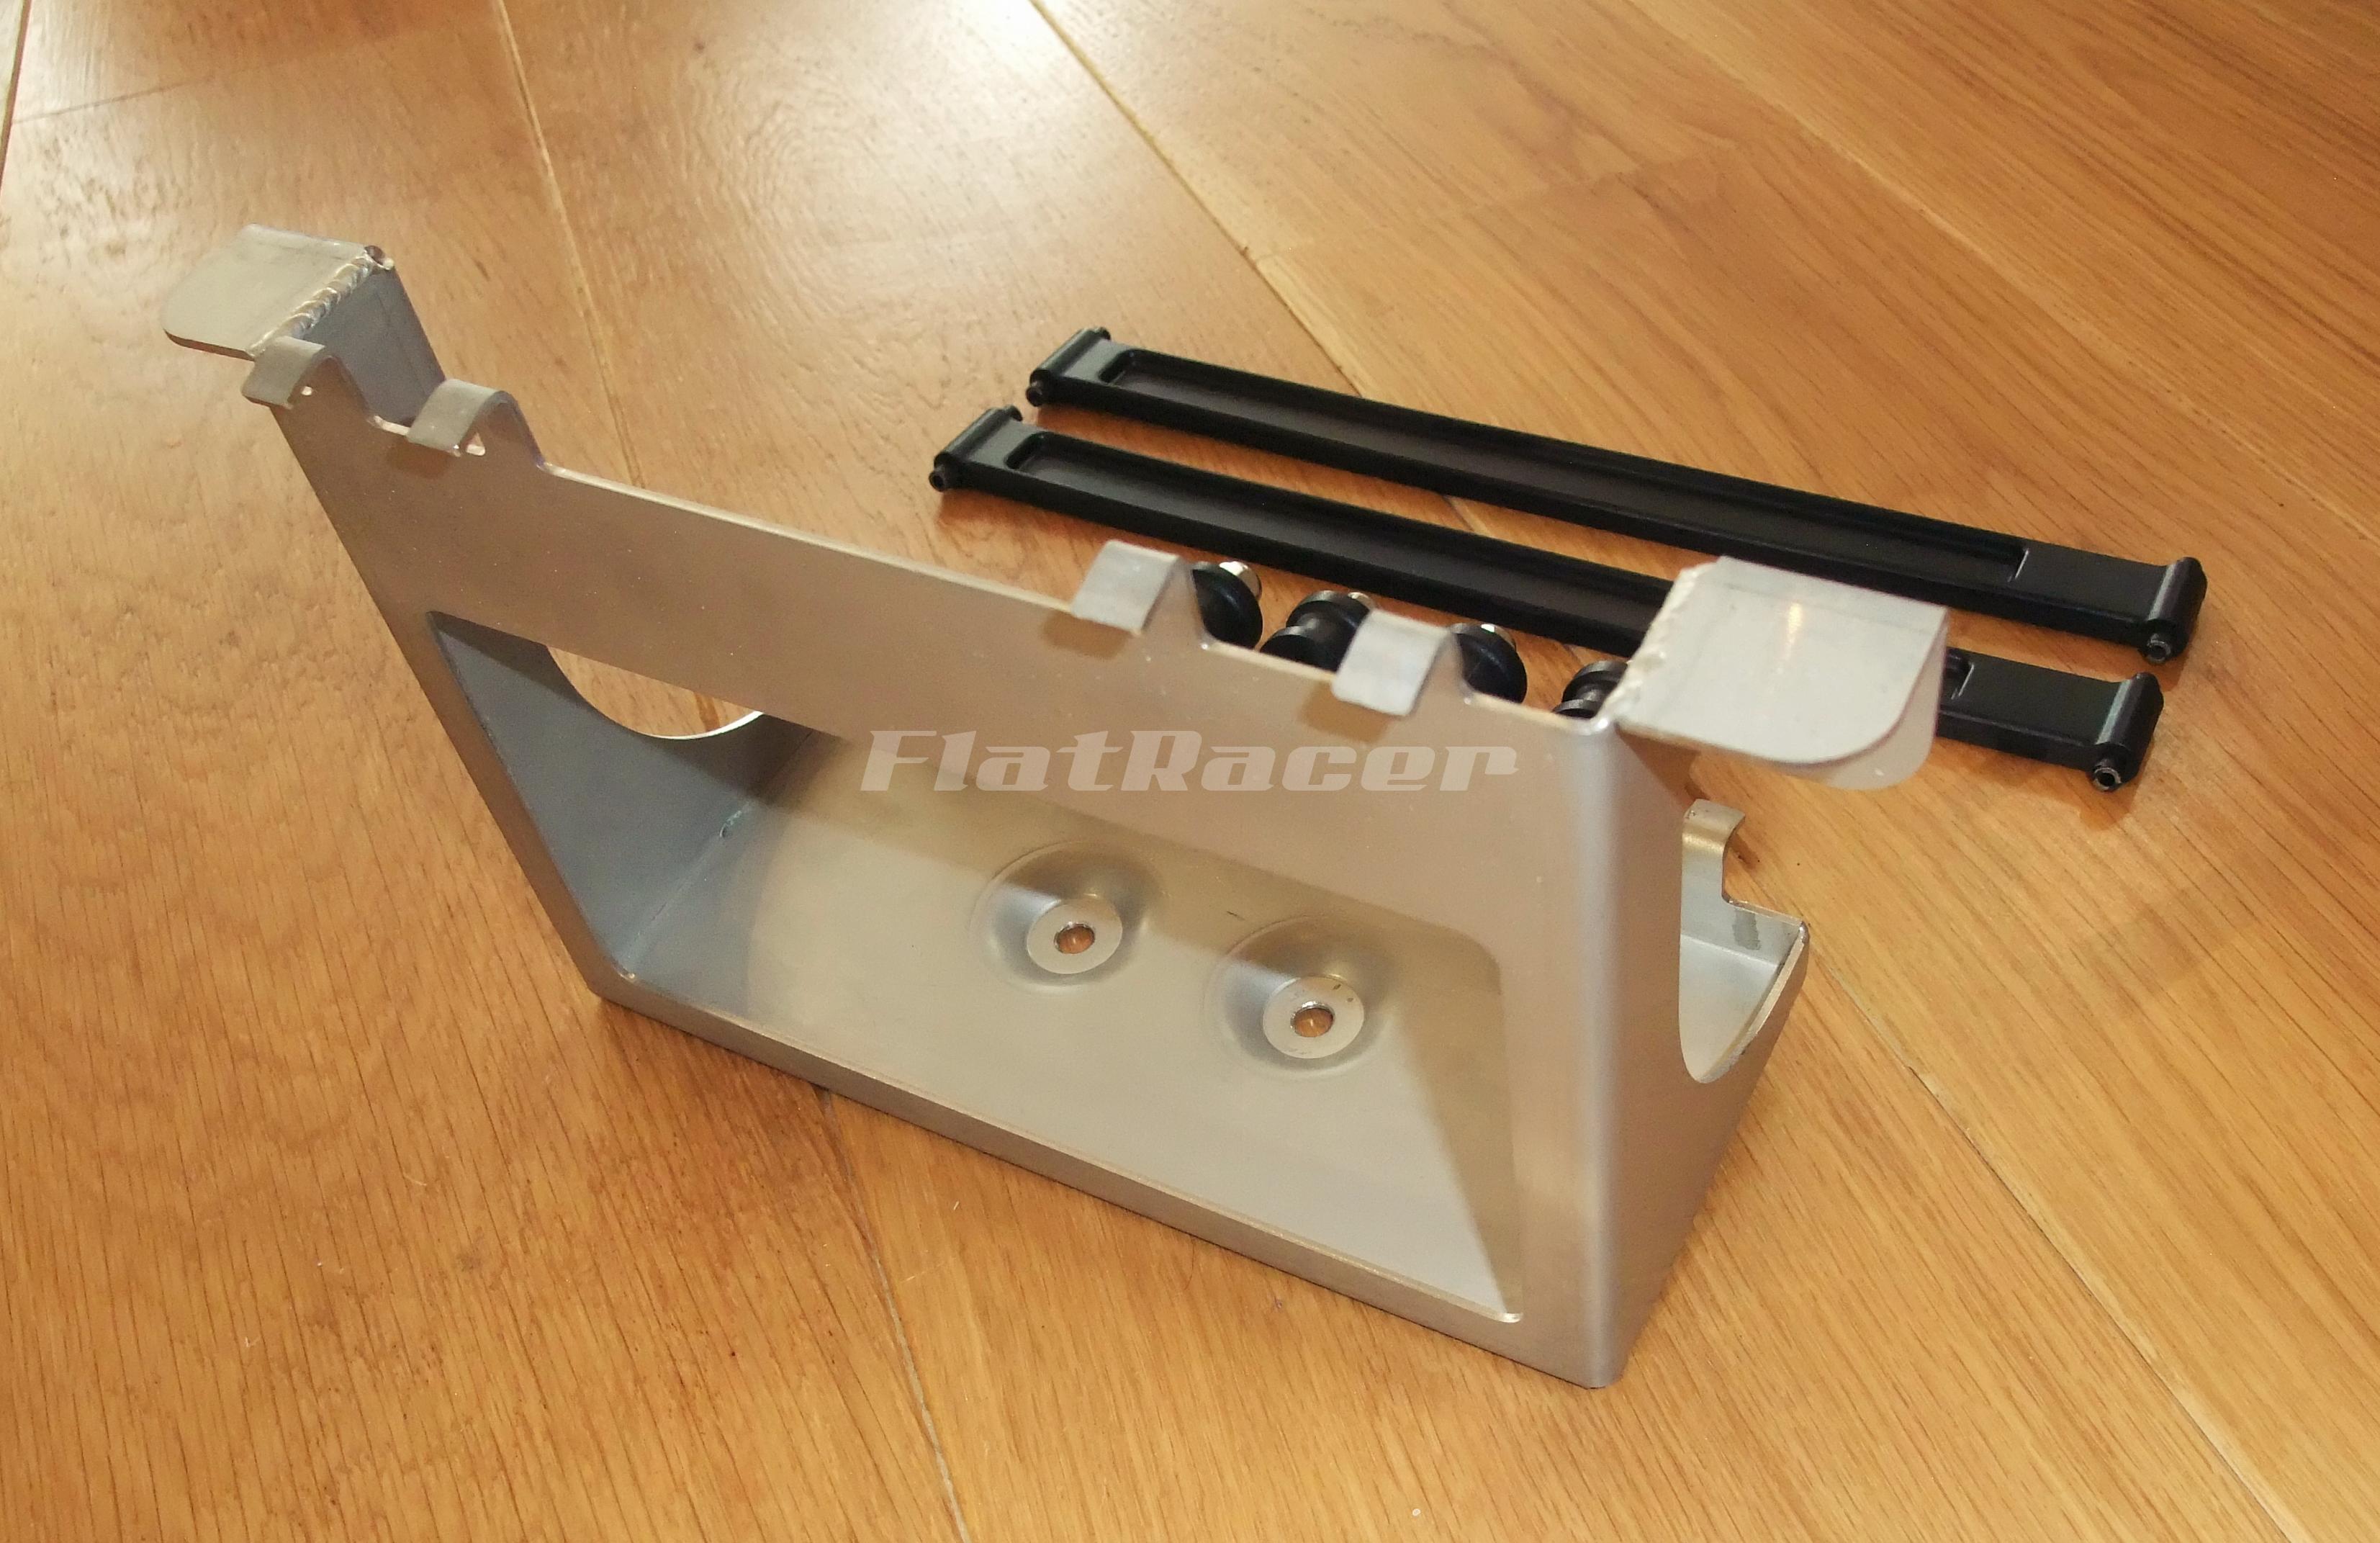 FlatRacer BMW Monolever (post 1985) stainless steel battery tray - with 4 x M6 rubber mounting rubber bobbins + pair of retaining rubber straps